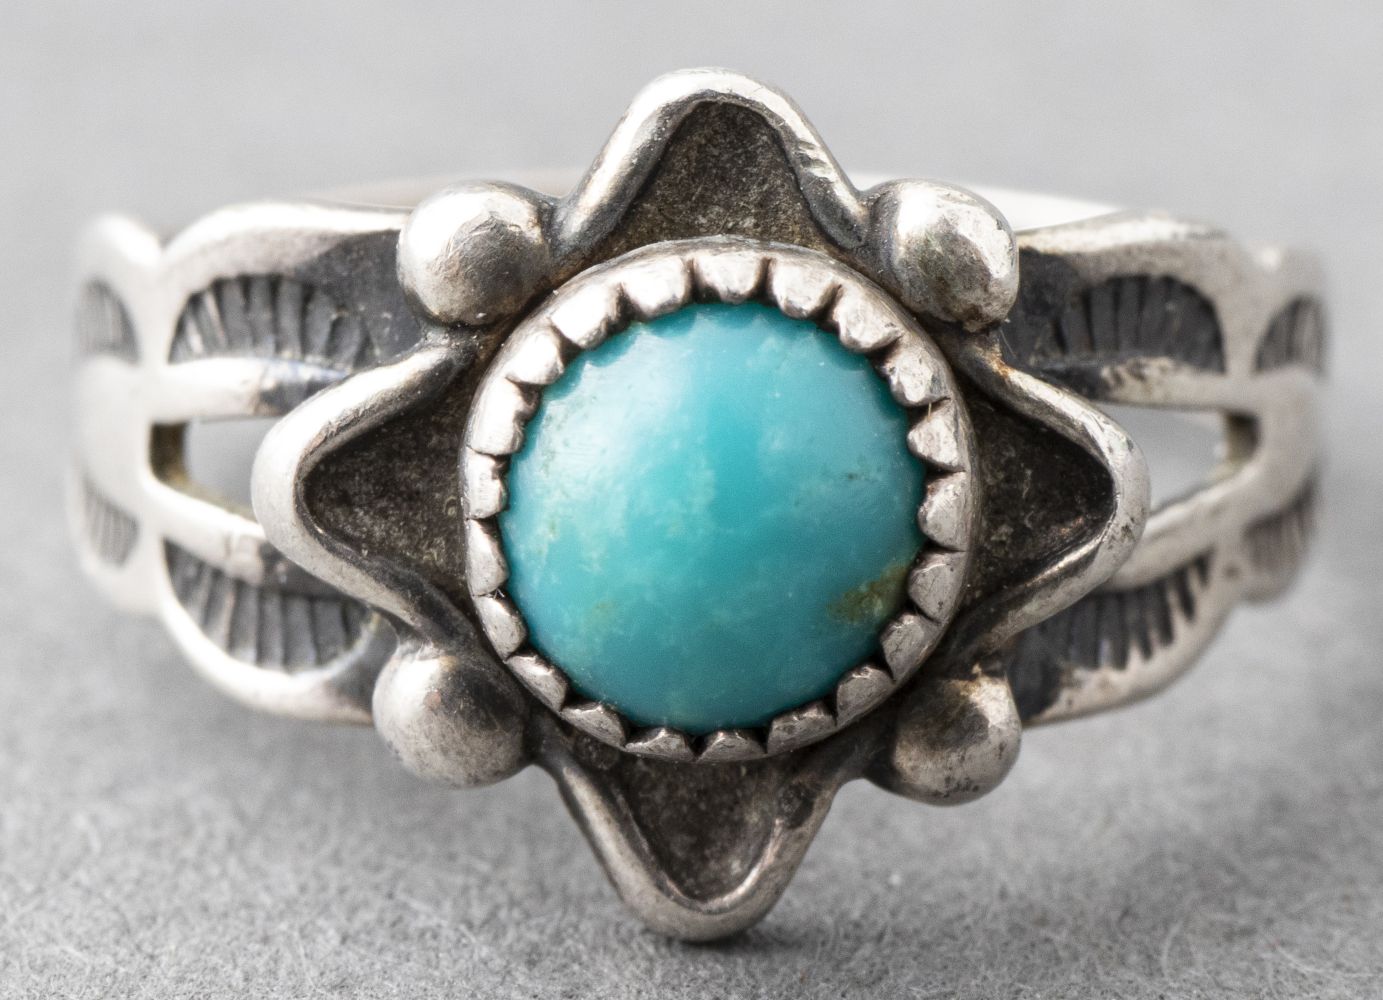 NATIVE AMERICAN NAVAJO SILVER TURQUOISE 3c563a